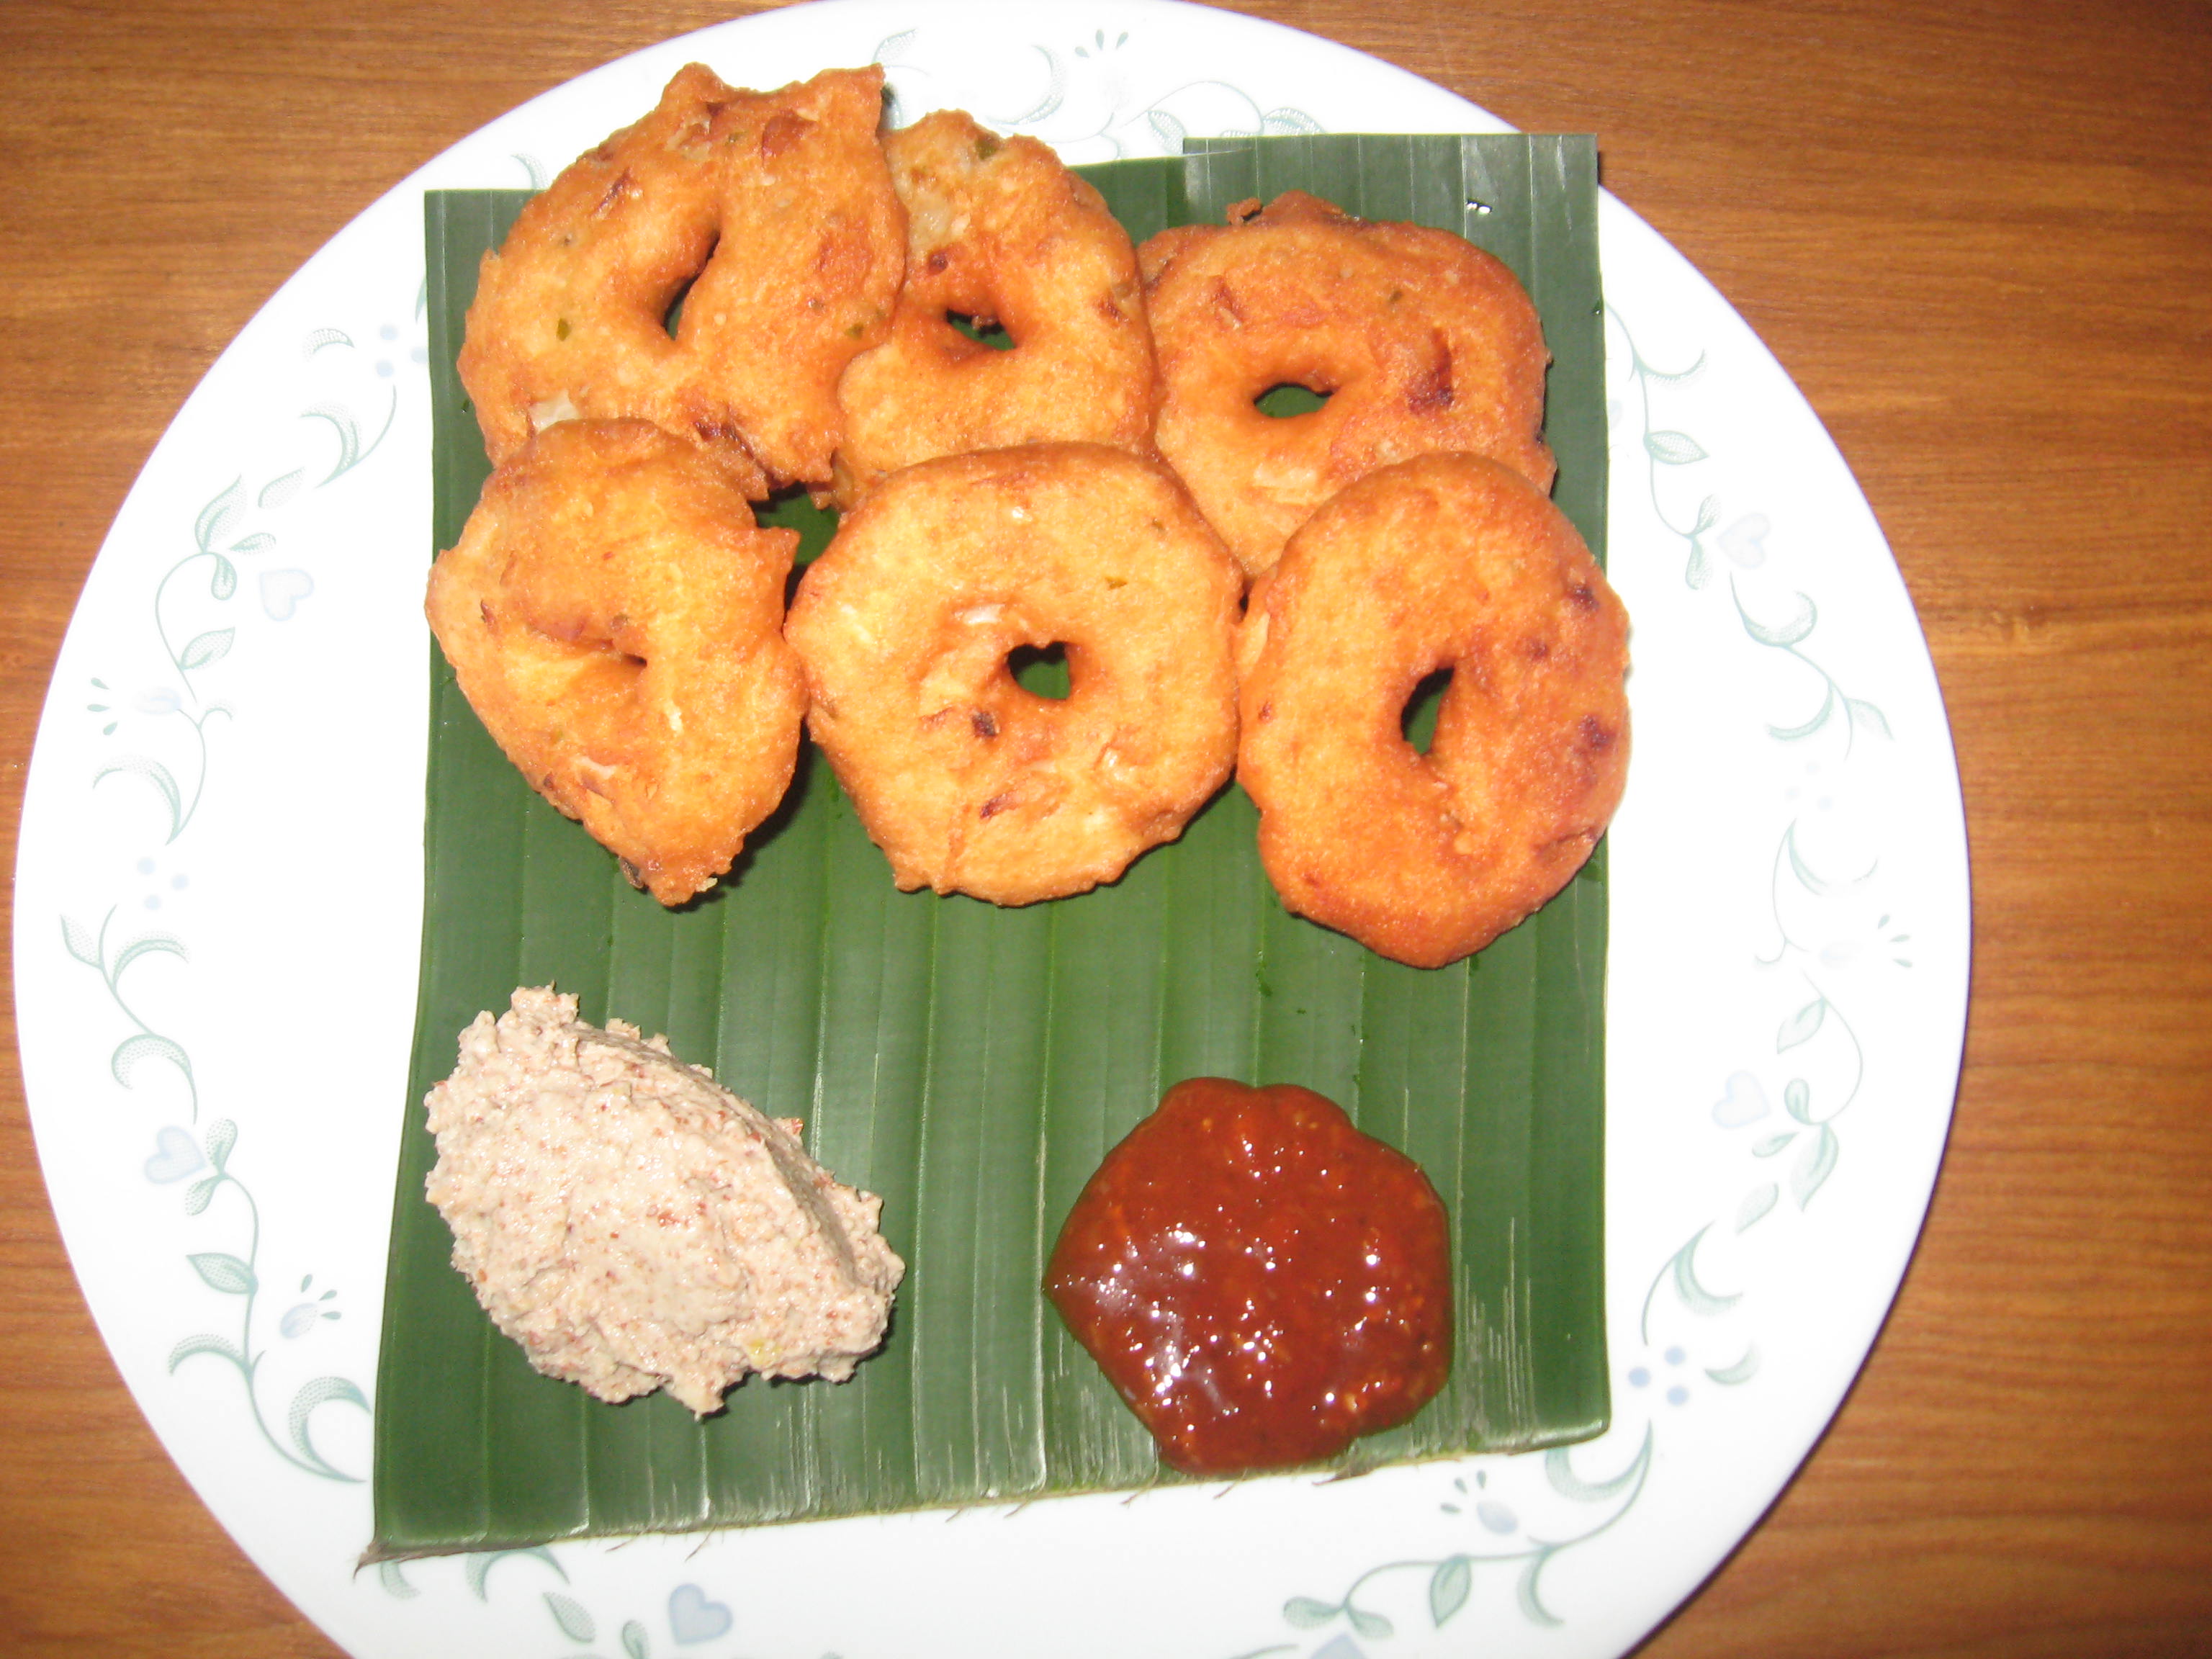 Garelus are fried savoury lentil donuts that form an important part of traditional Christmas feast in Andhra Pradesh